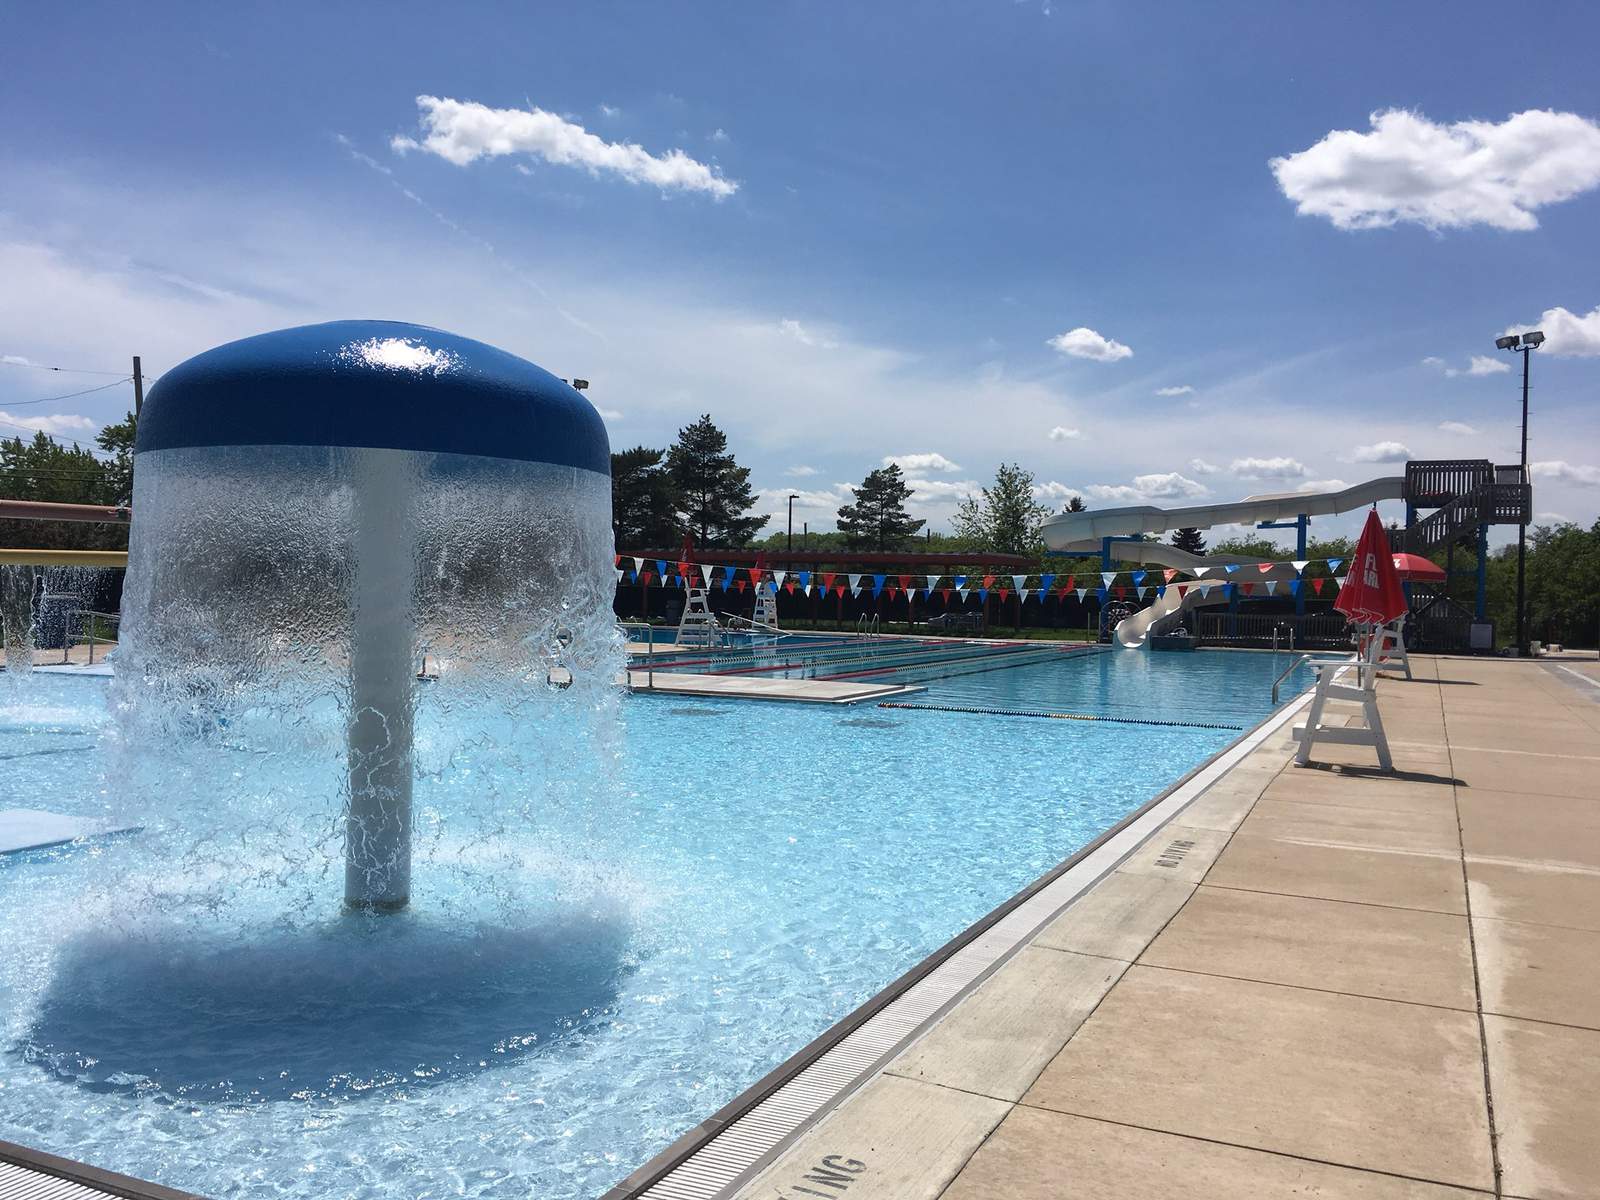 City of Ann Arbor to open all three outdoor pools this summer